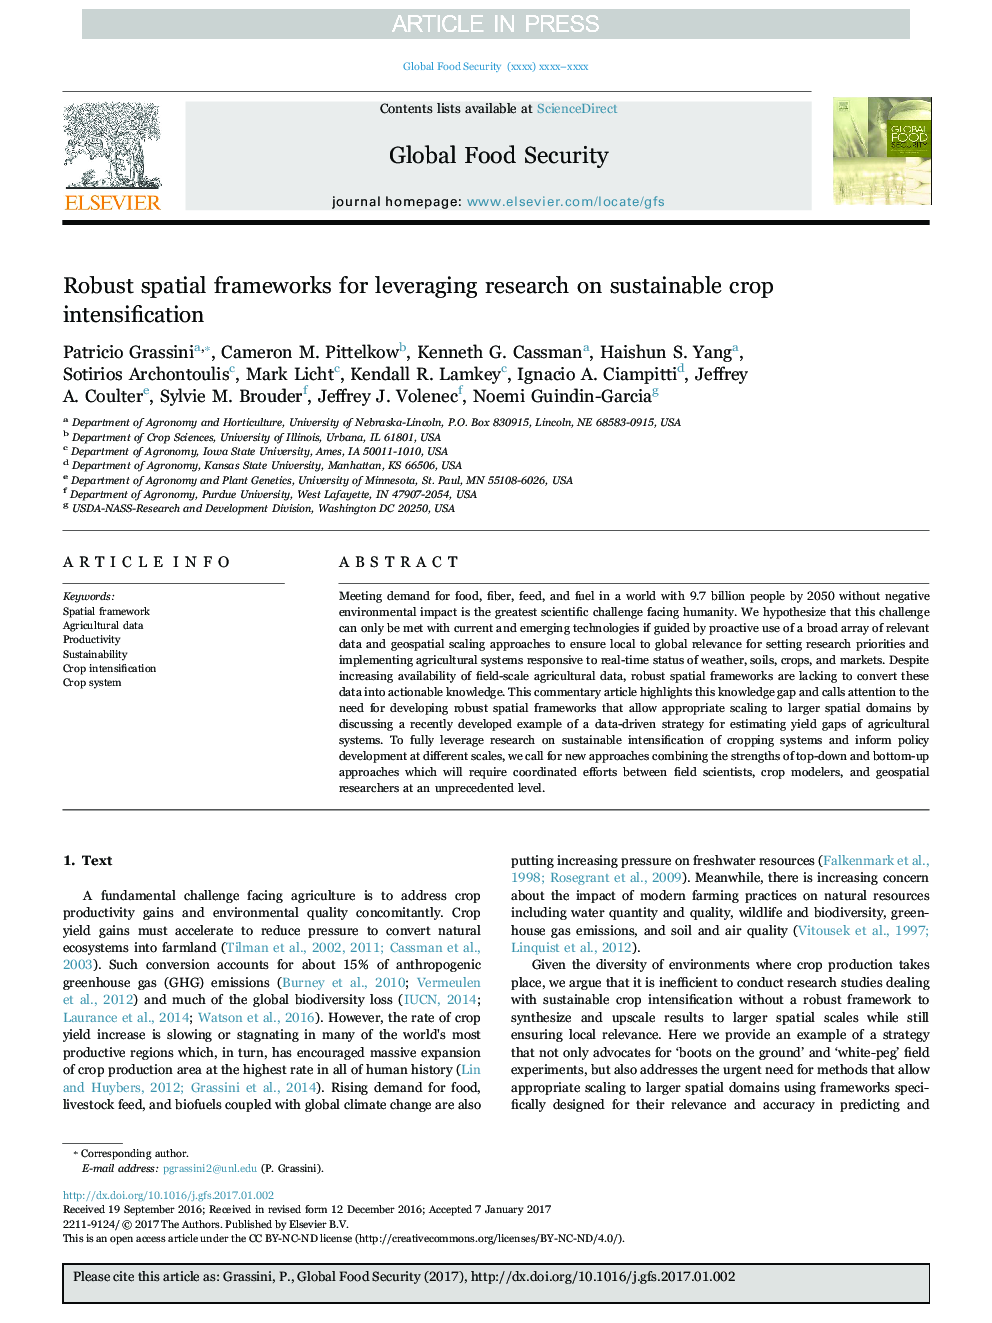 Robust spatial frameworks for leveraging research on sustainable crop intensification